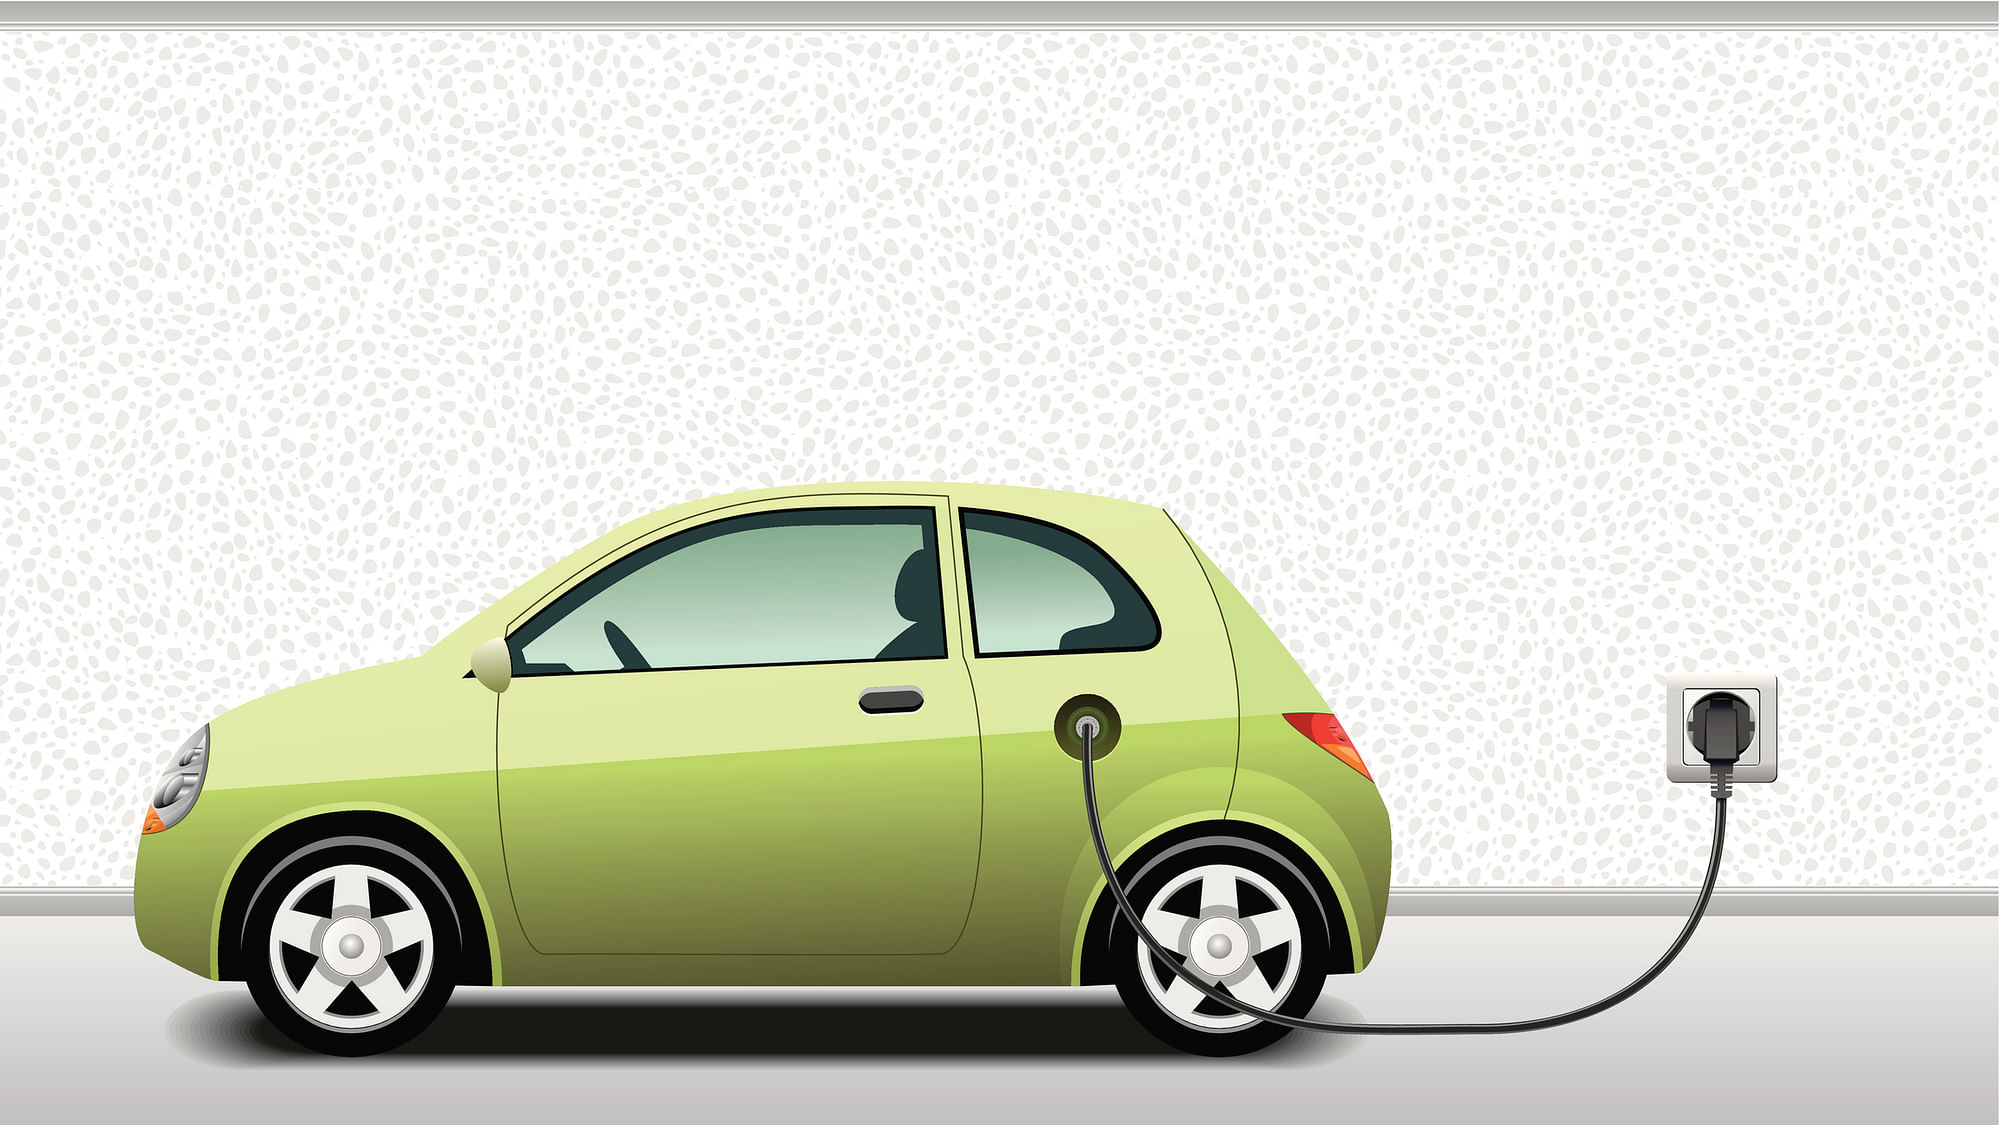 Reports suggest more than 7.2 lakh electric vehicles have been registered in Delhi till now.